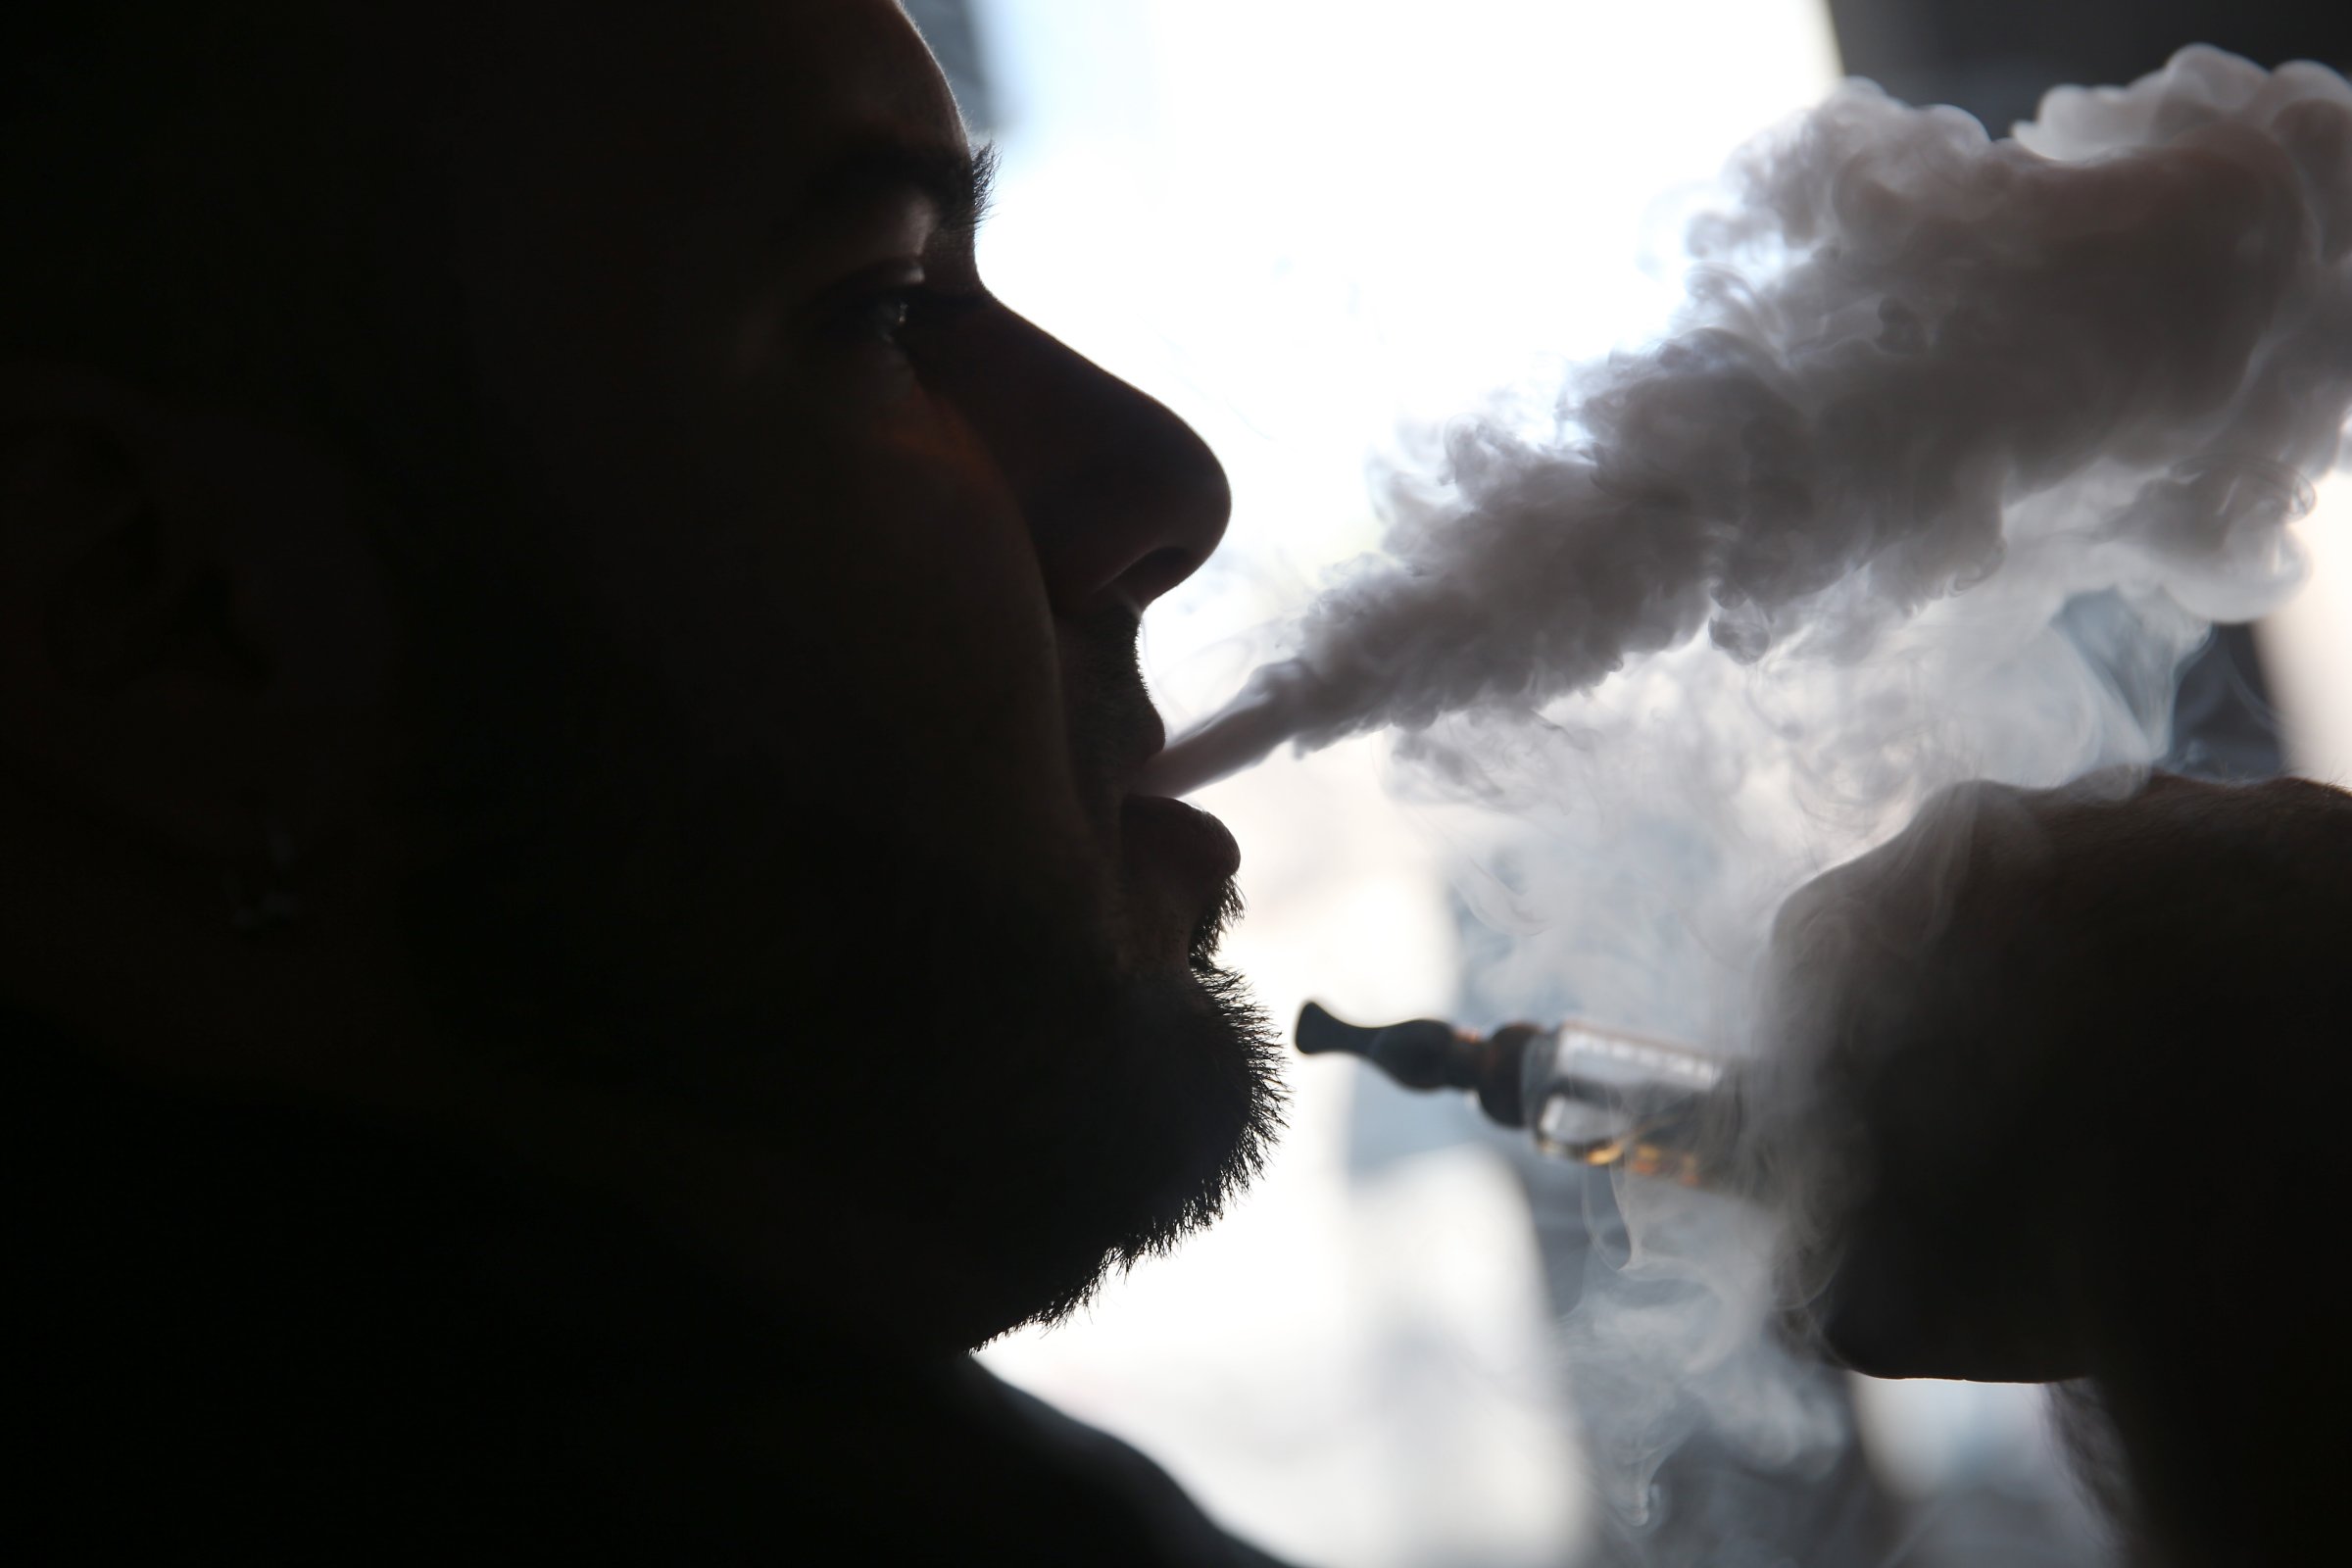 A salesman waits for customers as he enjoys an electronic cigarette at a store in Miami, Florida on April 24, 2014.